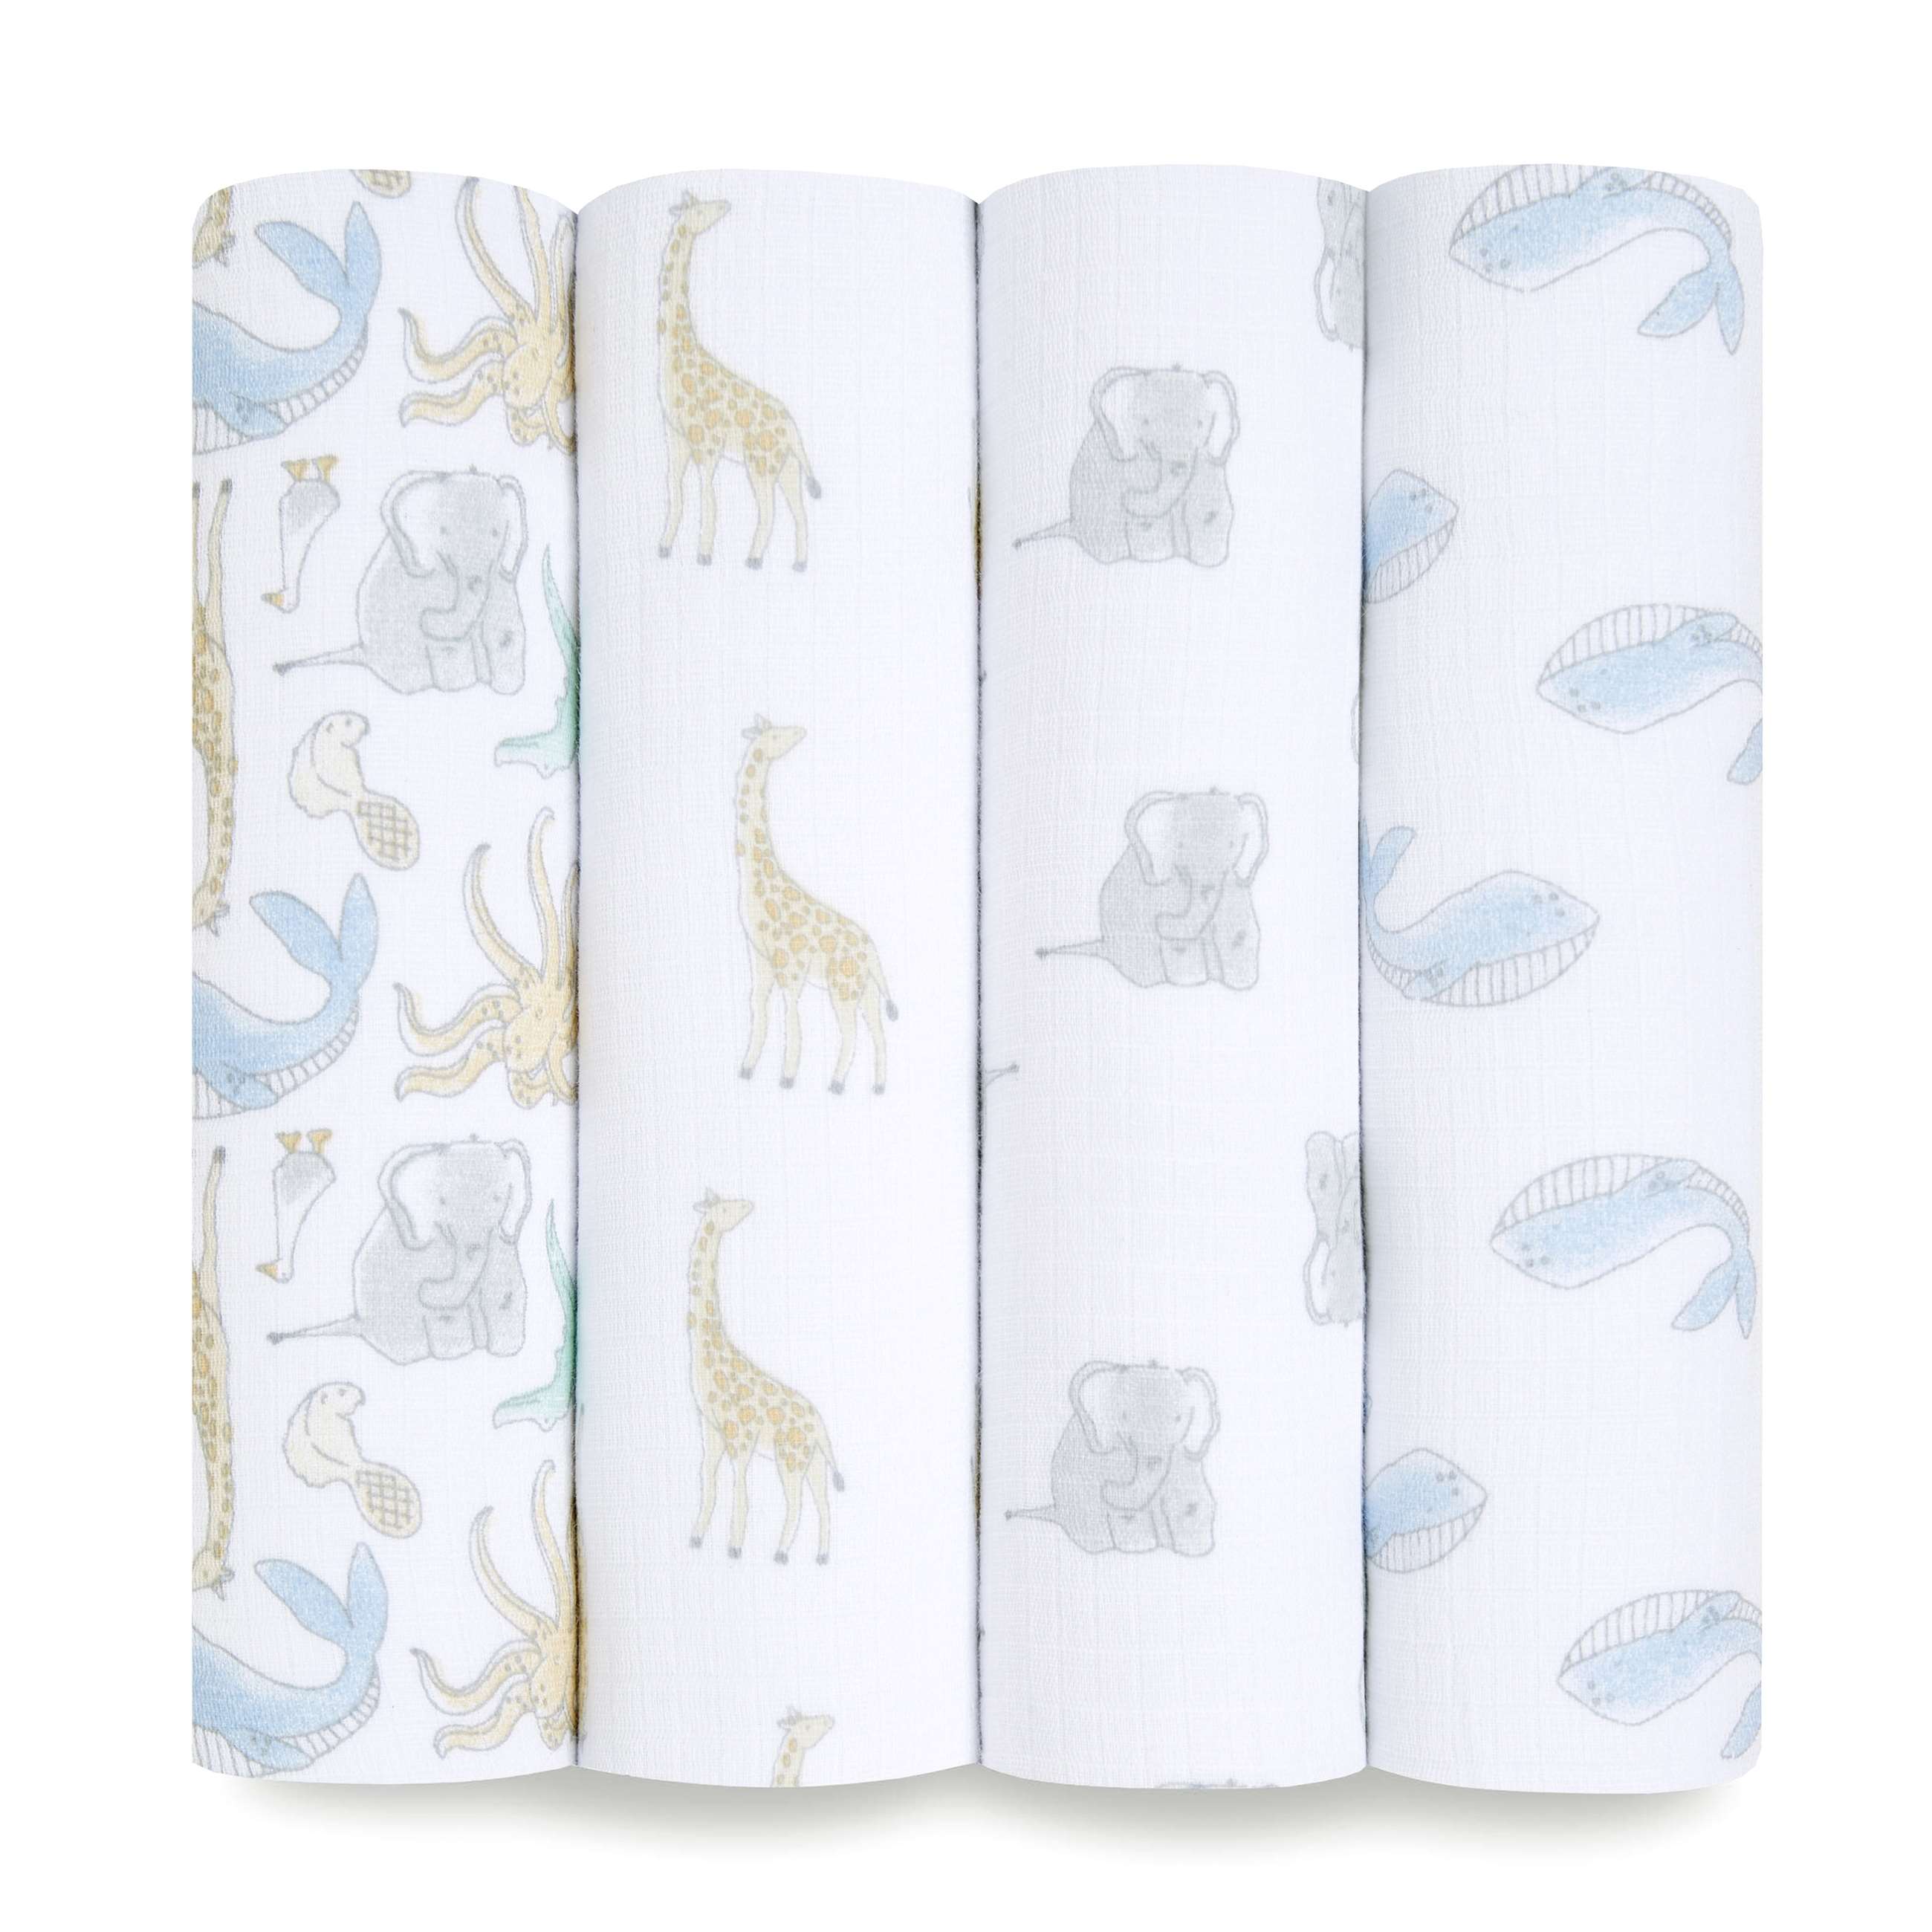 eswc40014-eswc40014b_0-essentials-cotton-muslin-swaddle-natural-history-4pack